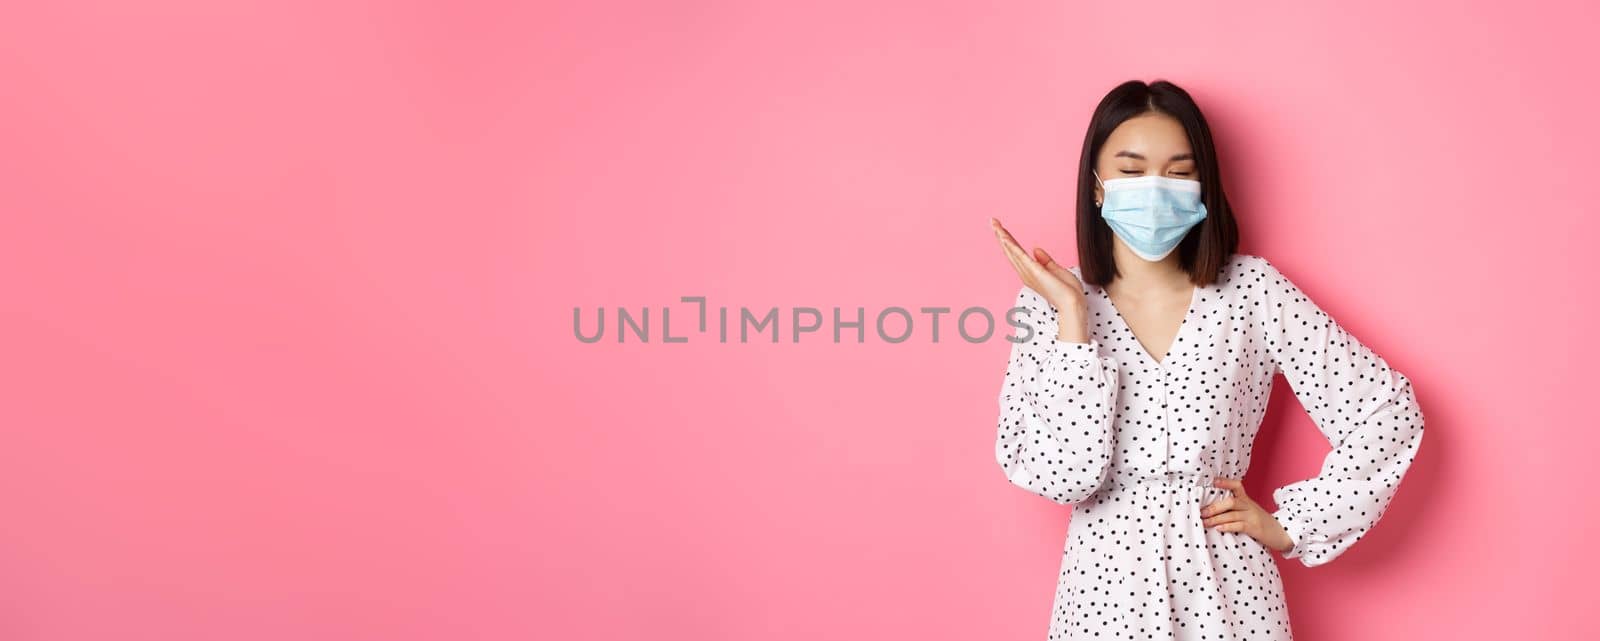 Covid-19, quarantine and lifestyle concept. Beautiful and confident asian woman in dress and face mask looking self-assured, standing sassy against pink background.